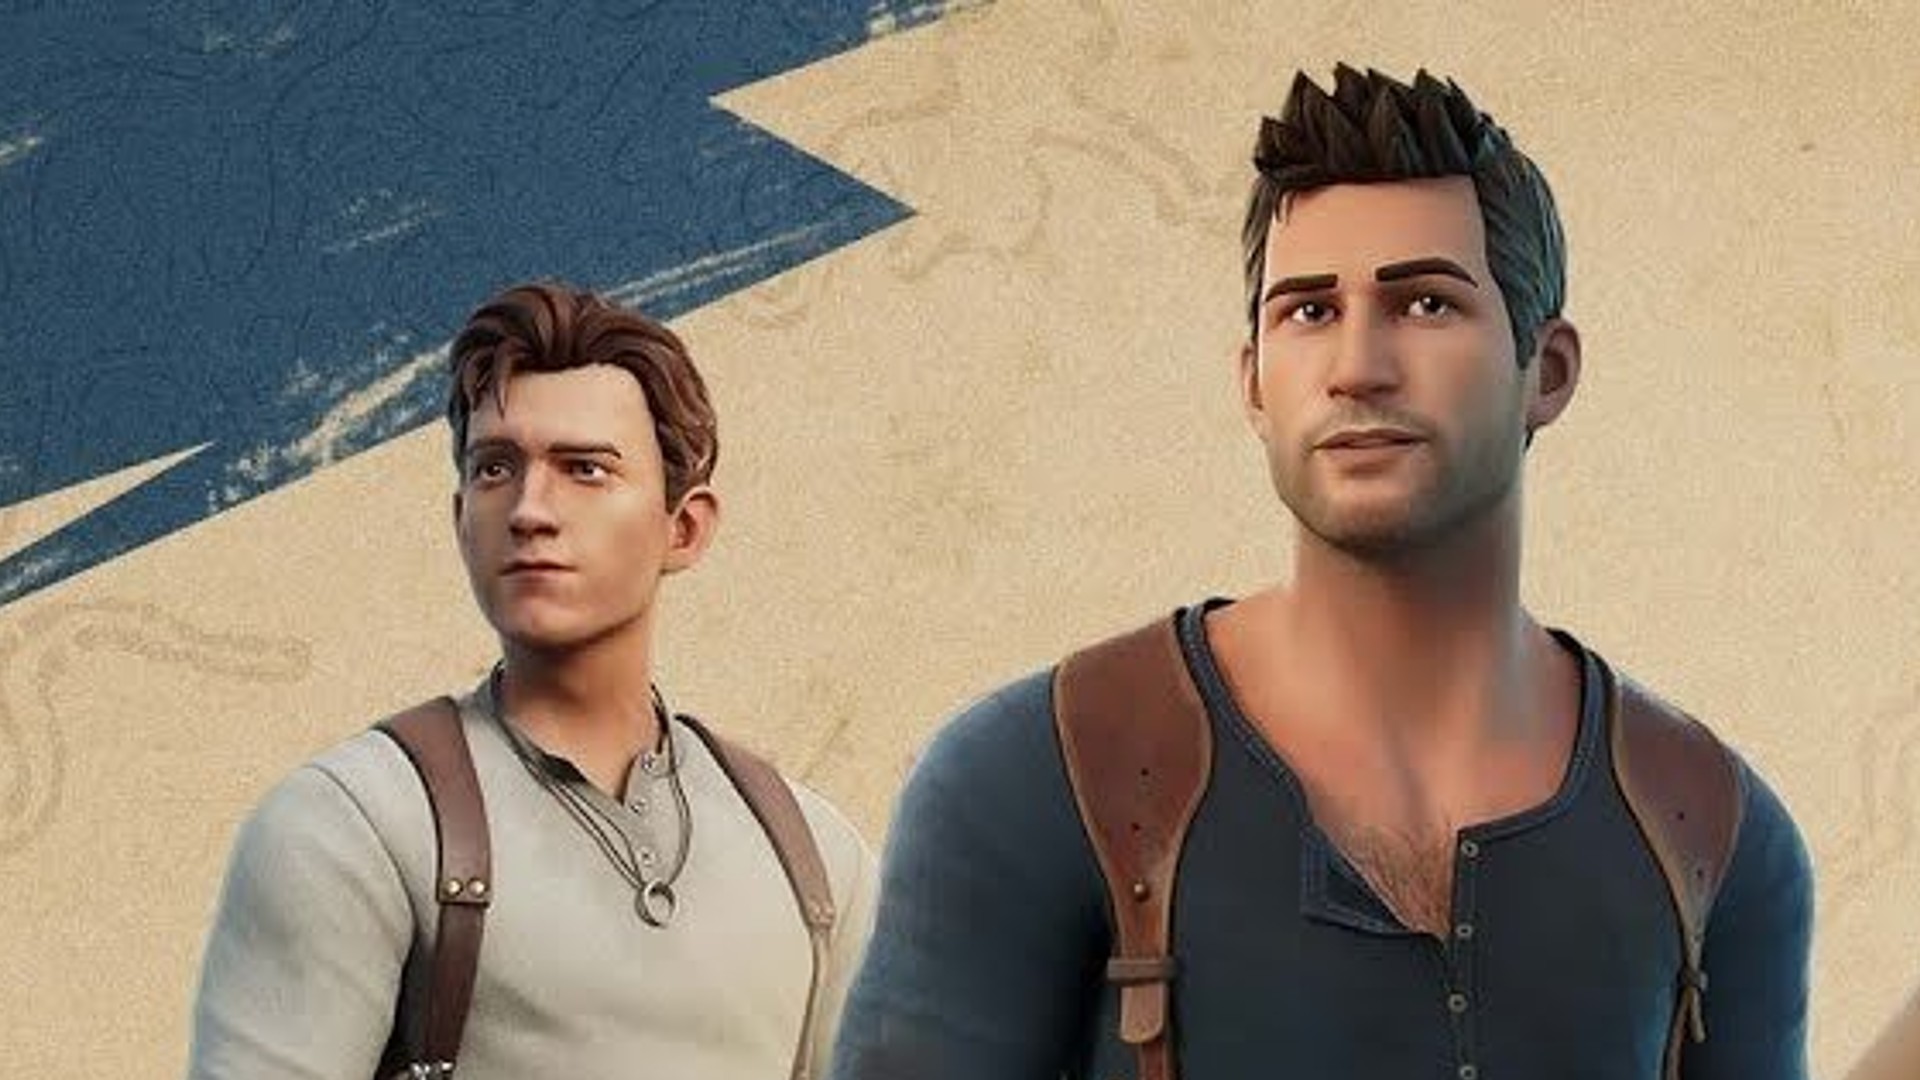 Fortnite Uncharted crossover: How to get Nathan Drake and Chloe Frazer